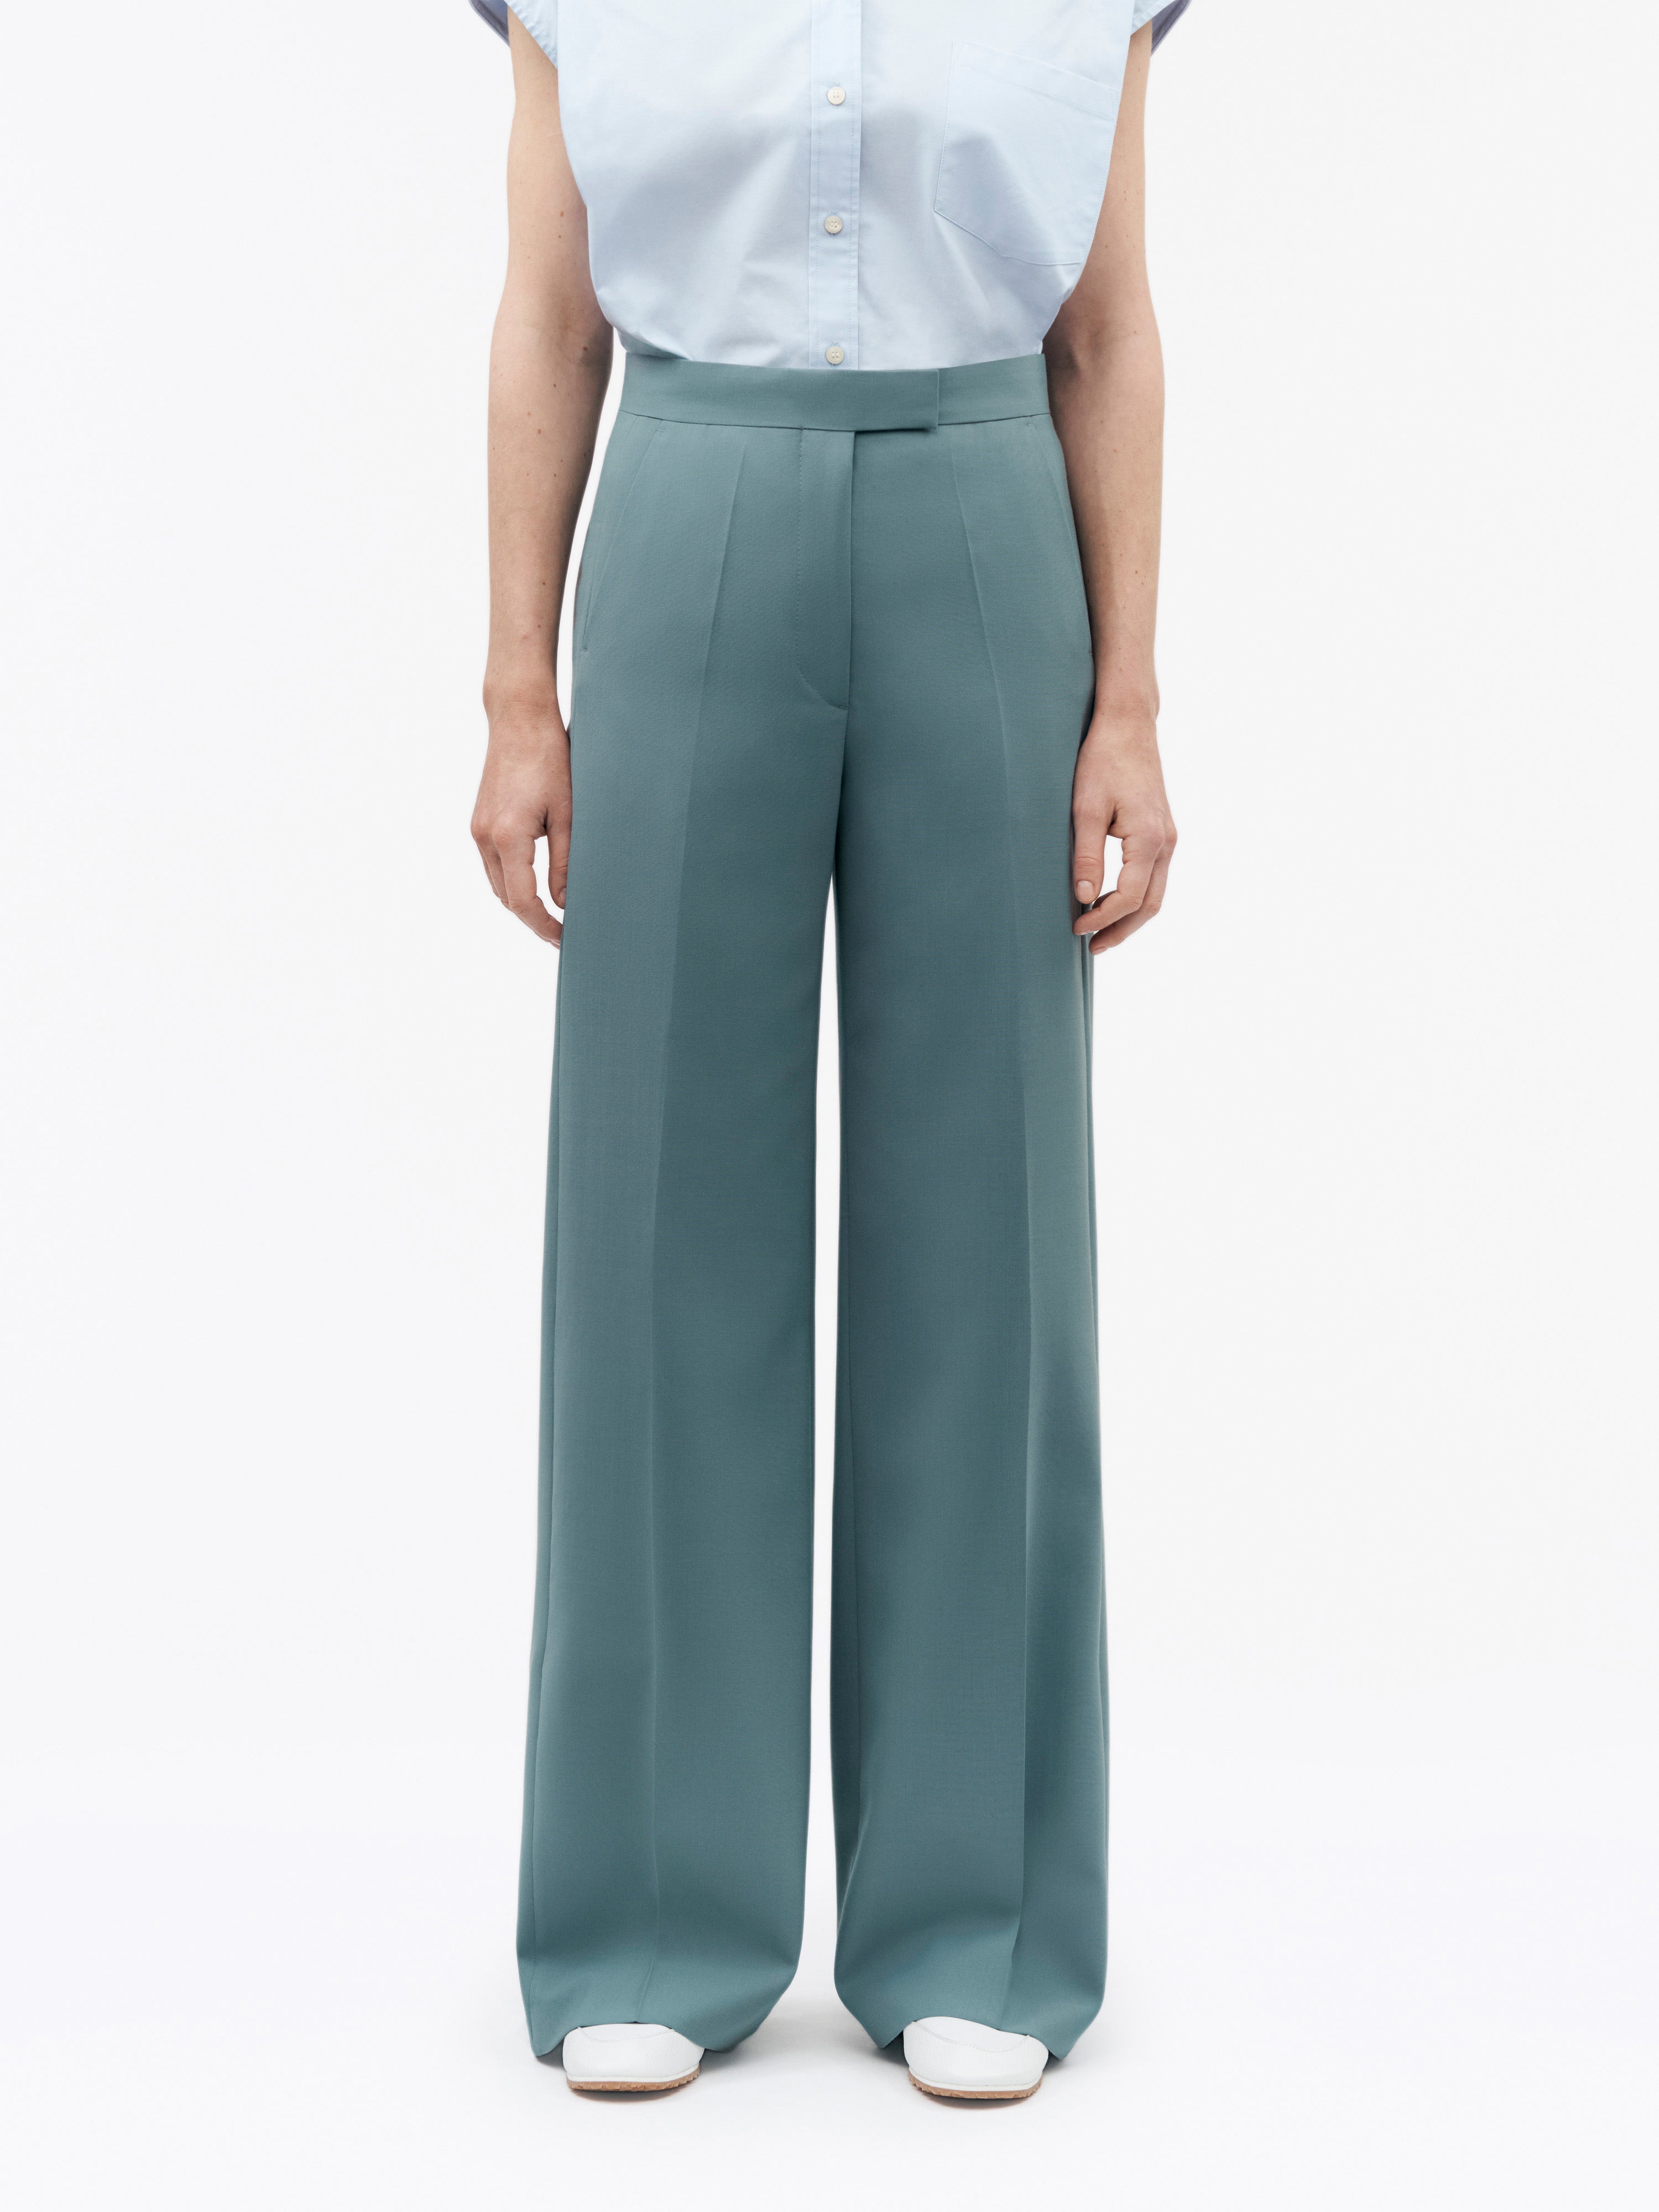 TIGER OF SWEDEN Irez Trousers in Teal S70902029 | eightywingold 